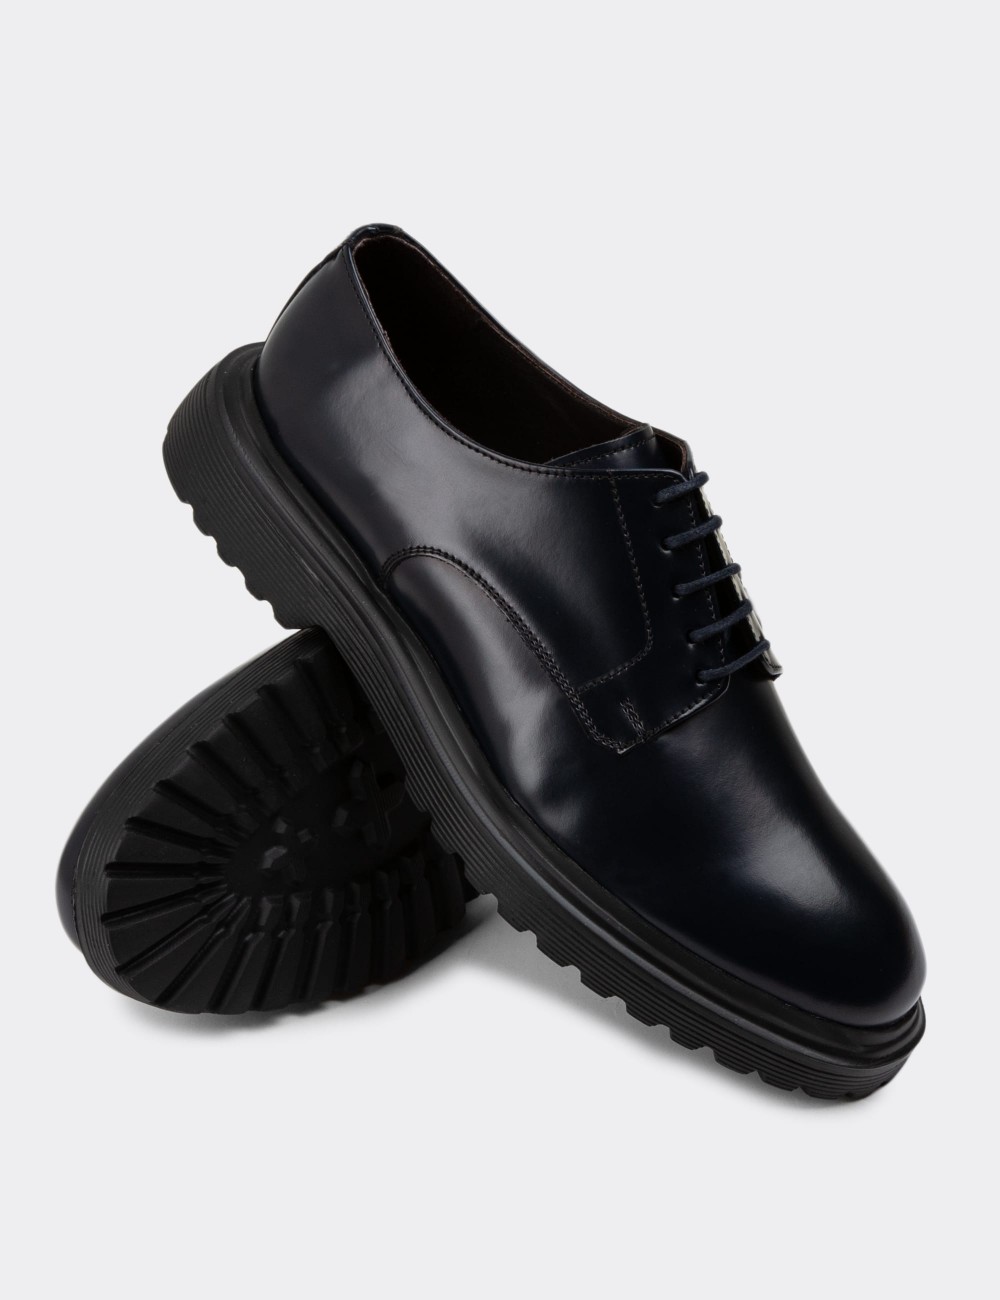 Navy Leather Lace-up Shoes - 01932MLCVE02